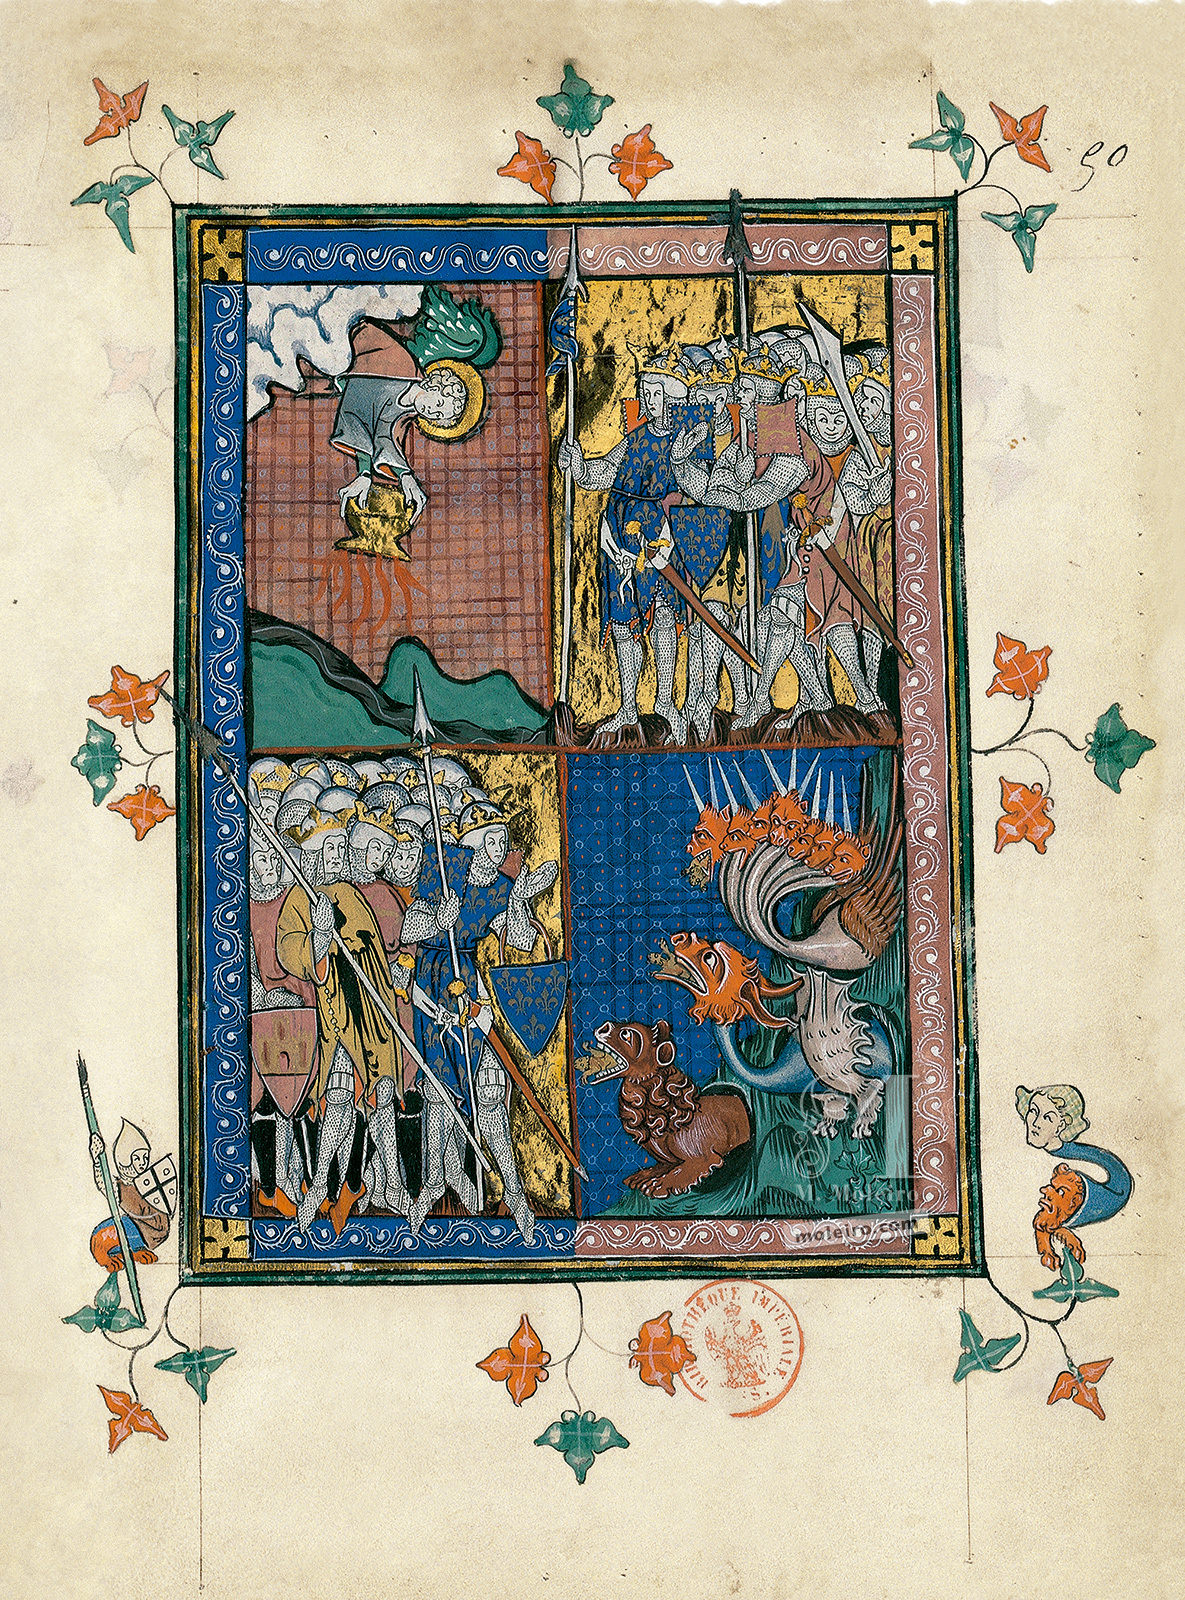 APOCALYPSE OF 1313, f. 50r: The Sixth Bowl, Knights in armor